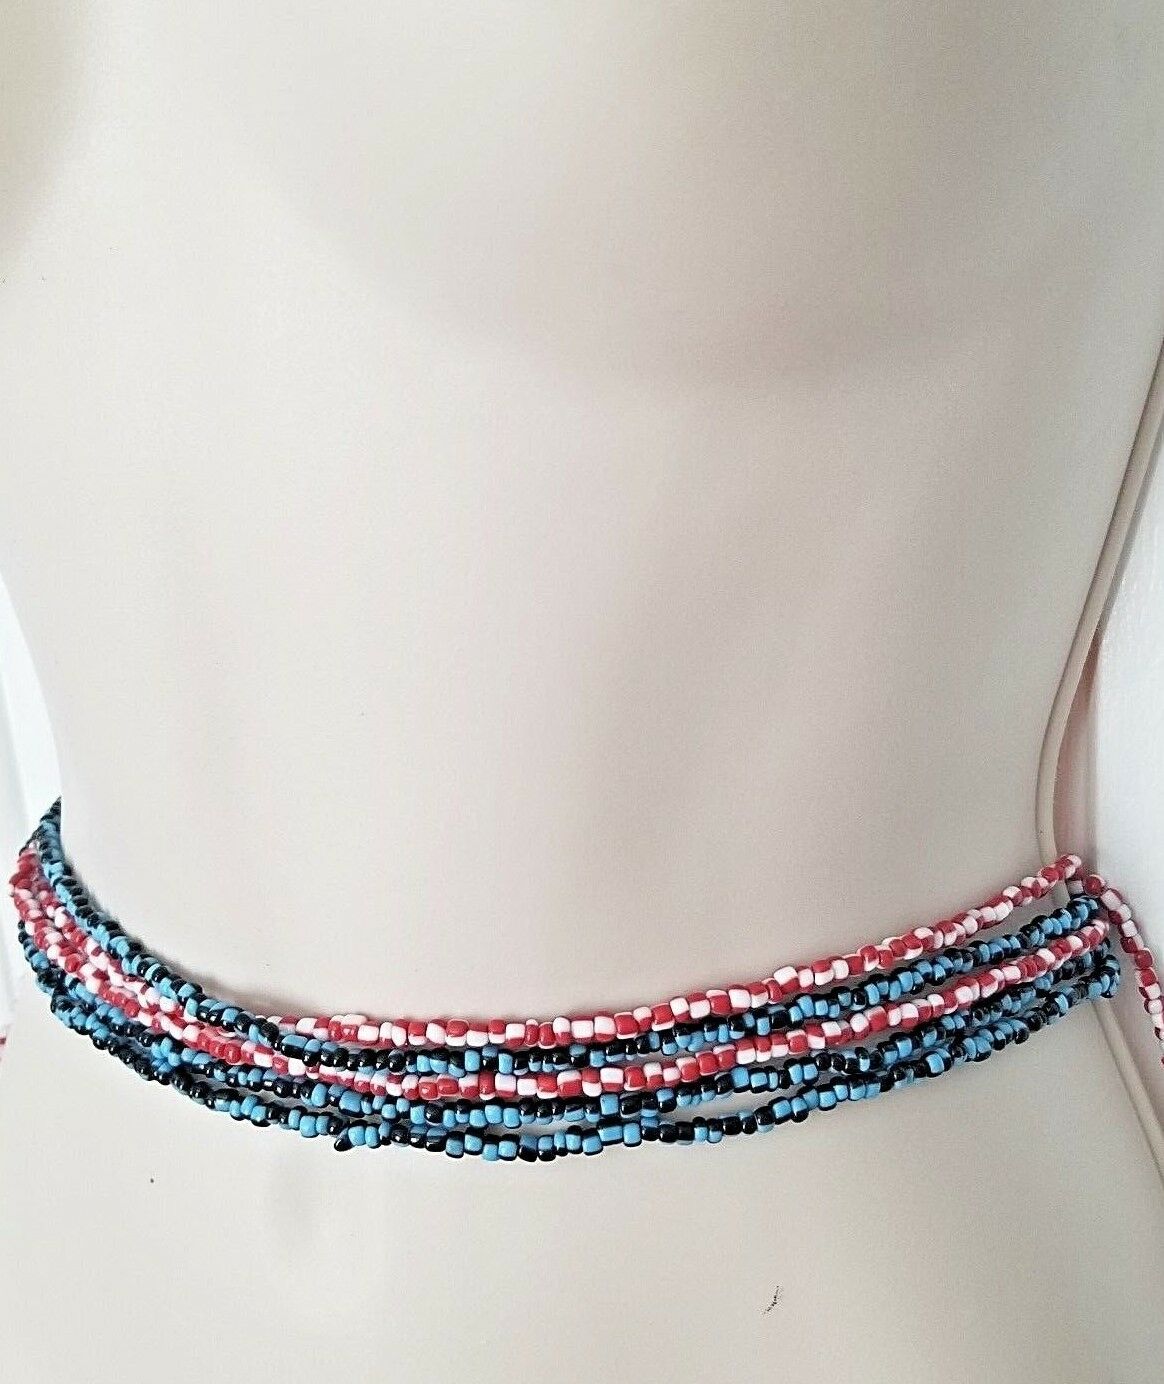 New ! Beautiful  Bi-colored Waist Beads 0-50 Inches Avaliable